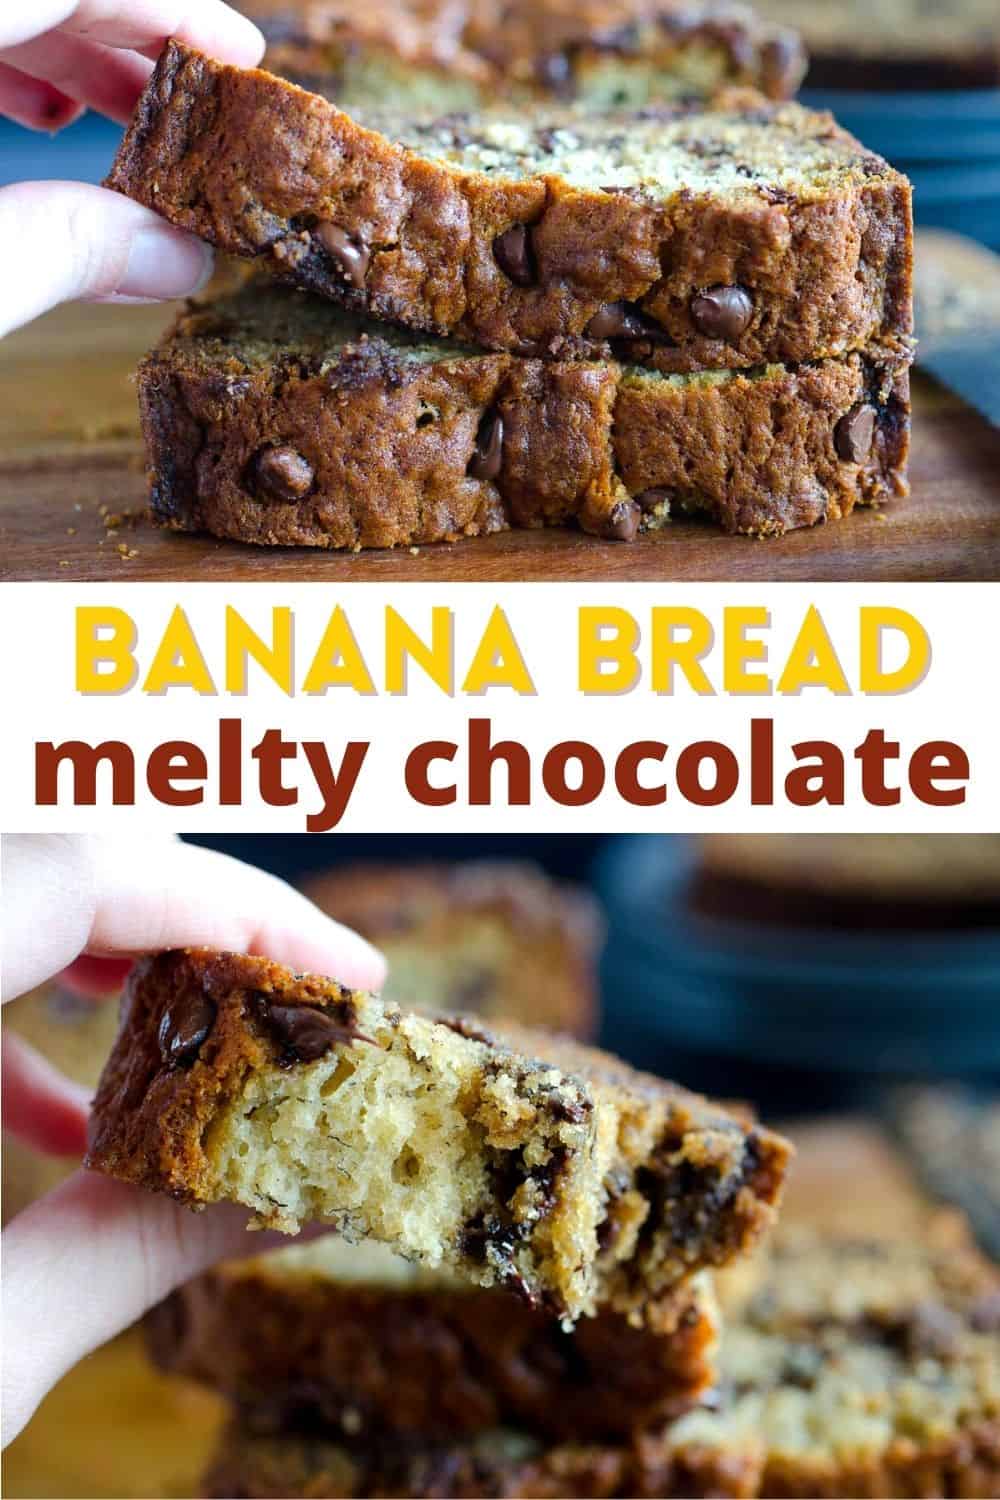 This is the best chocolate chip banana bread loaded with melty chocolate chips and very ripe bananas. Super moist and deliciously sweet!